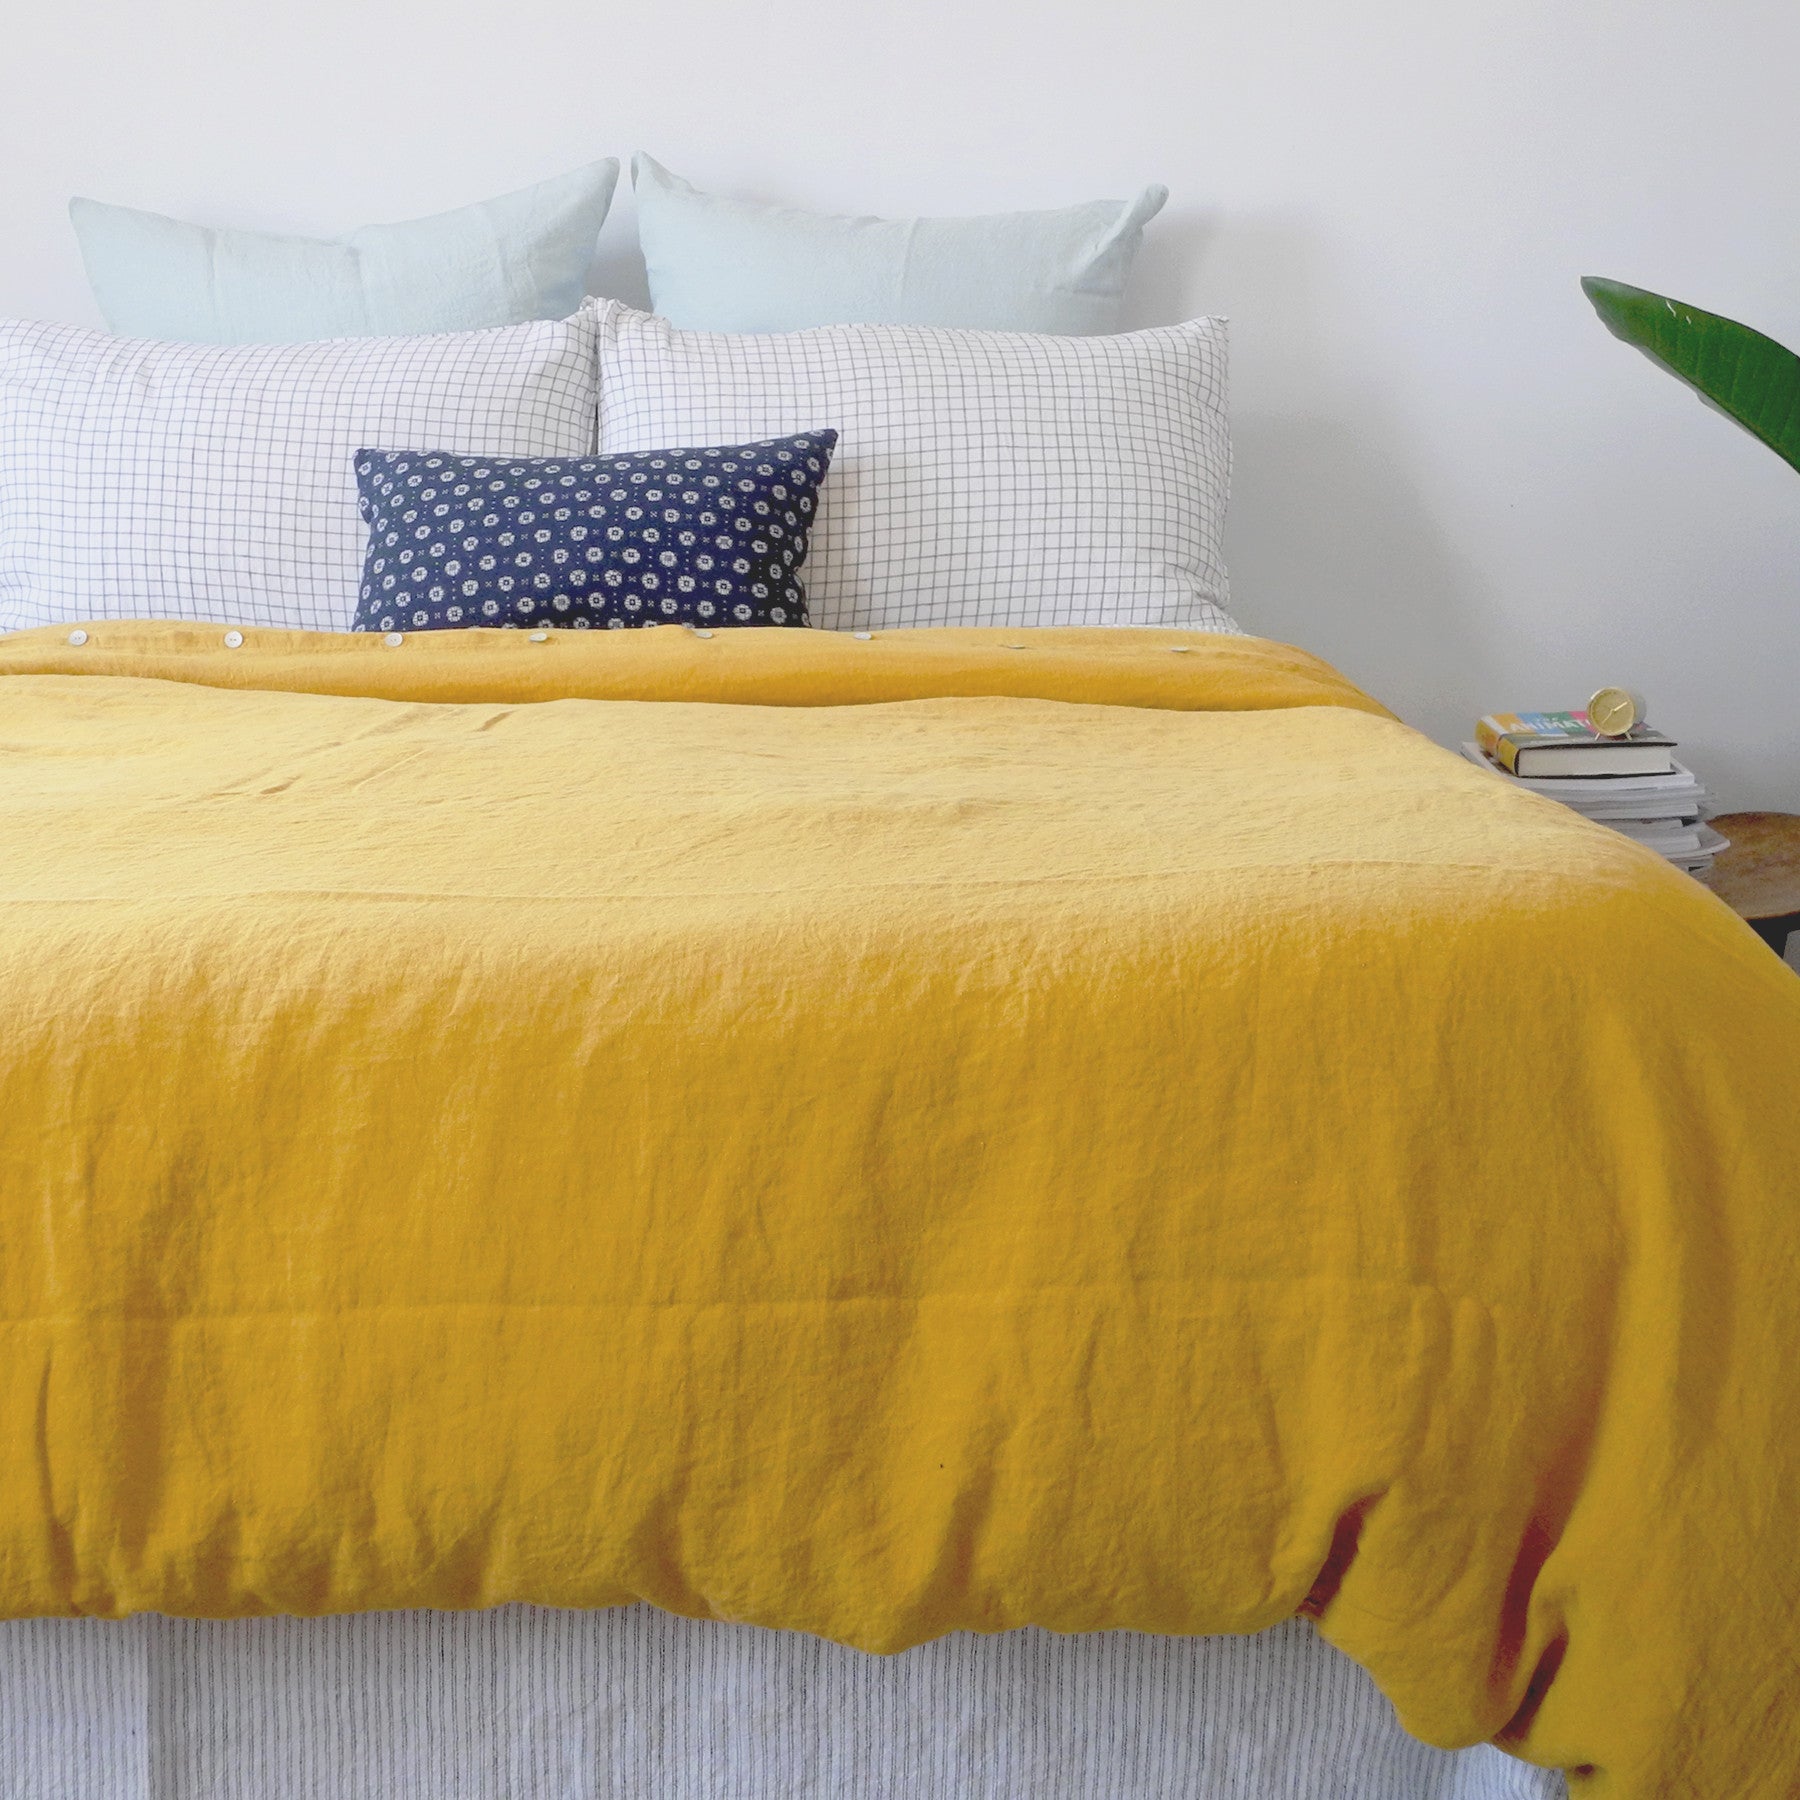 A Linge Particulier Linen Duvet in Honey gives a mustard and yellow color to this duvet for a colorful linen bedding look from Collyer&#39;s Mansion